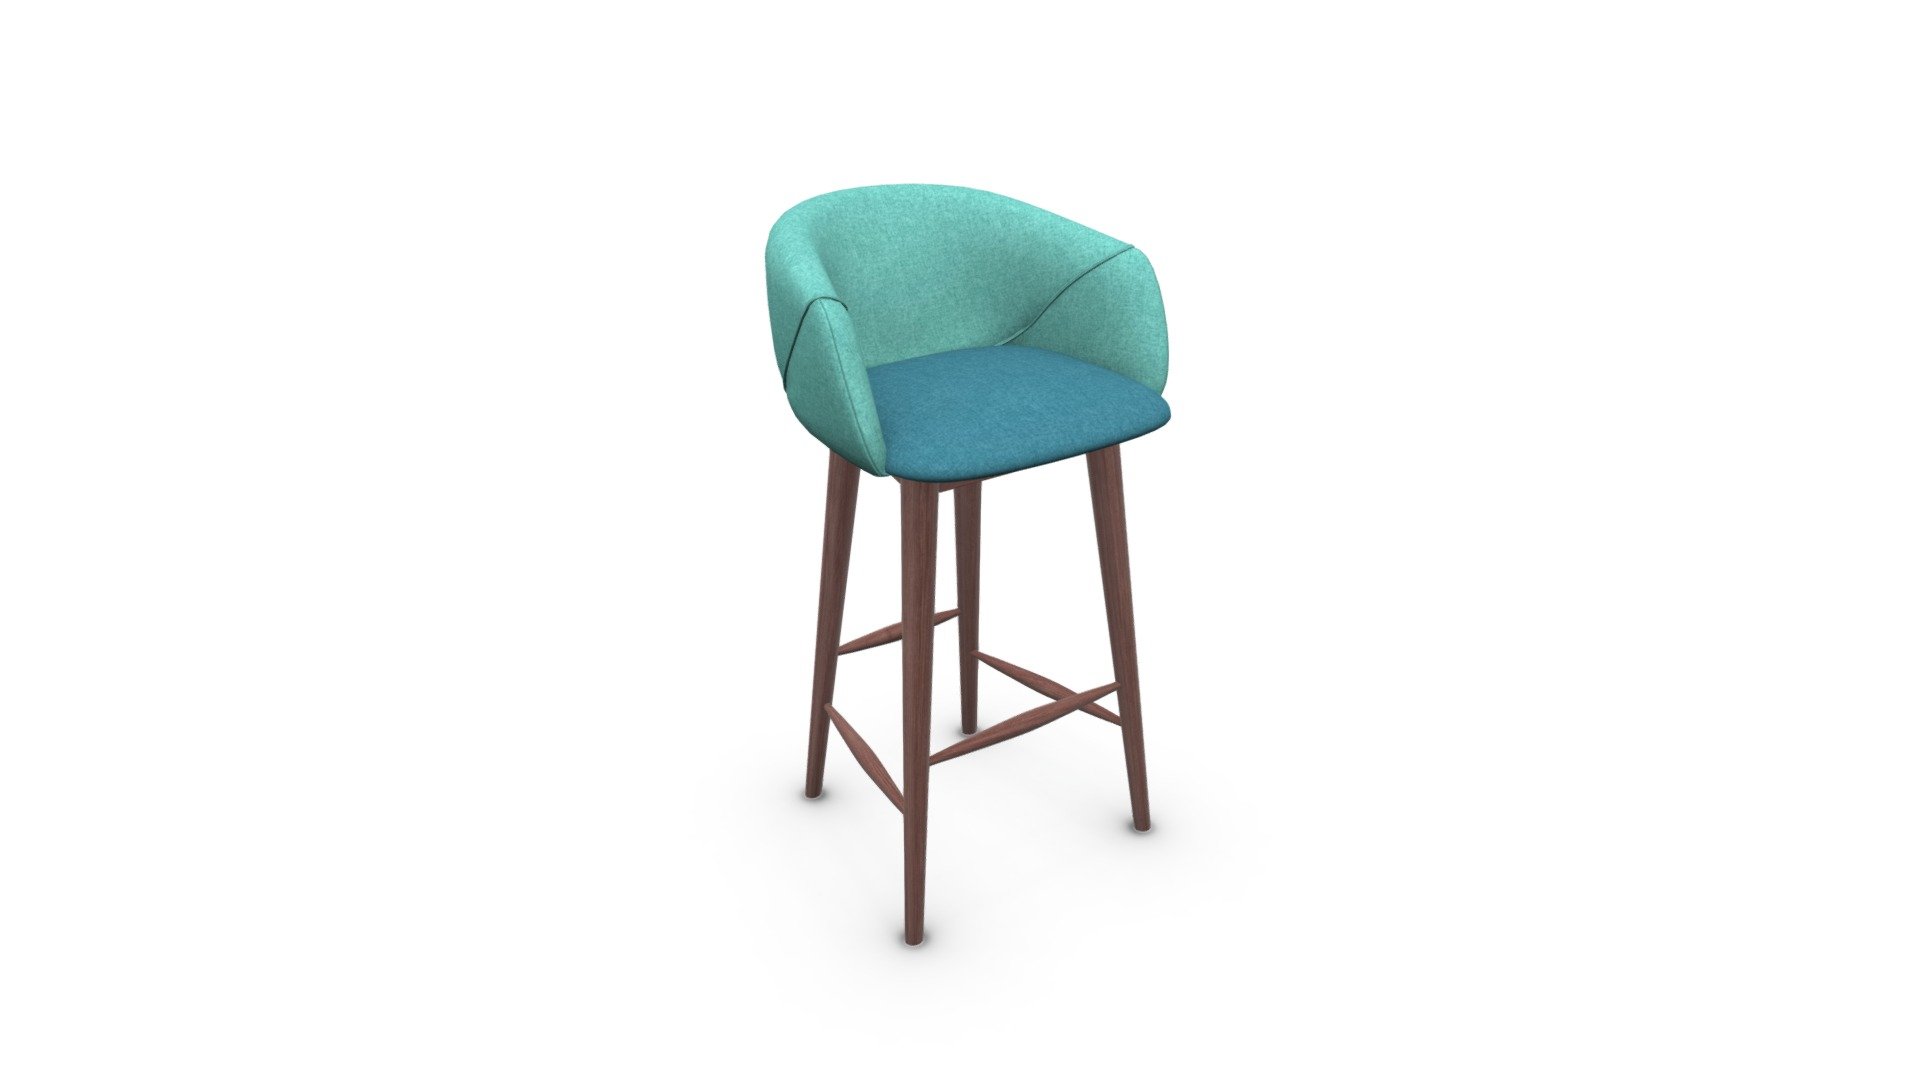 Lule Bar Stool, Mineral Blue and Emerald Green